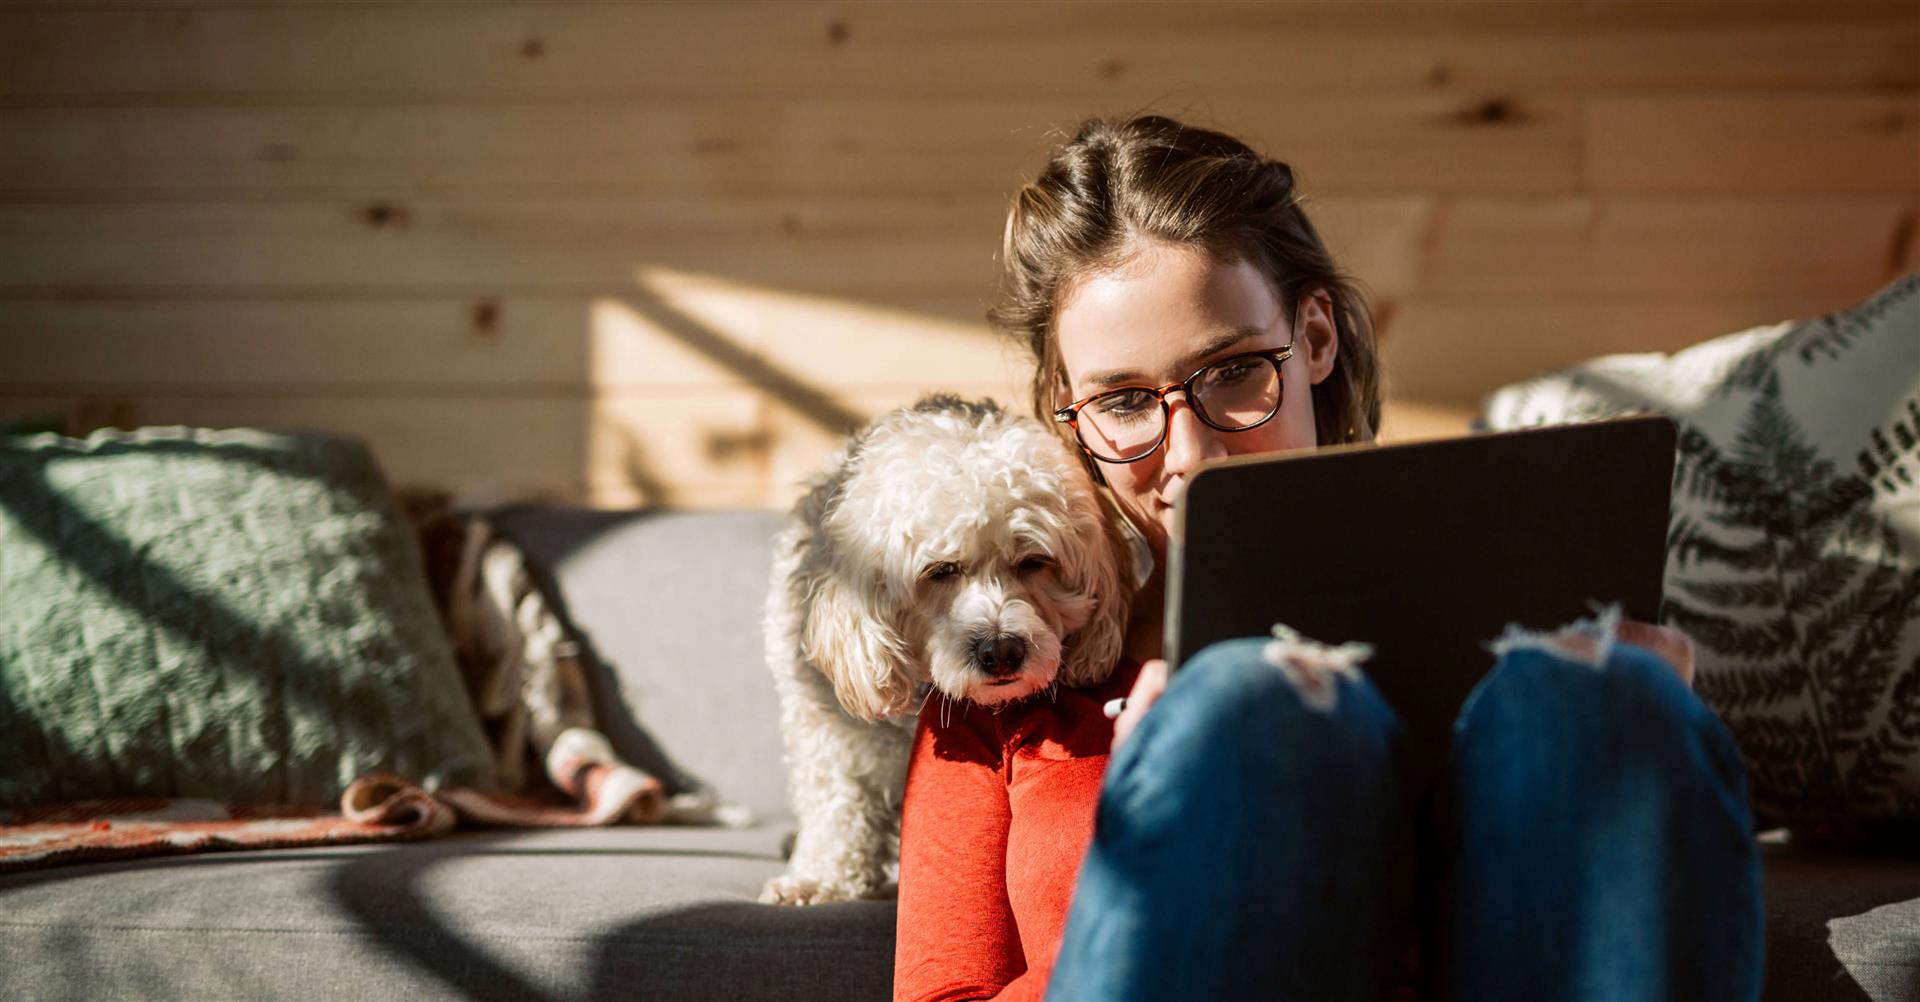 Lady using tablet with a dog peering over her shoulder